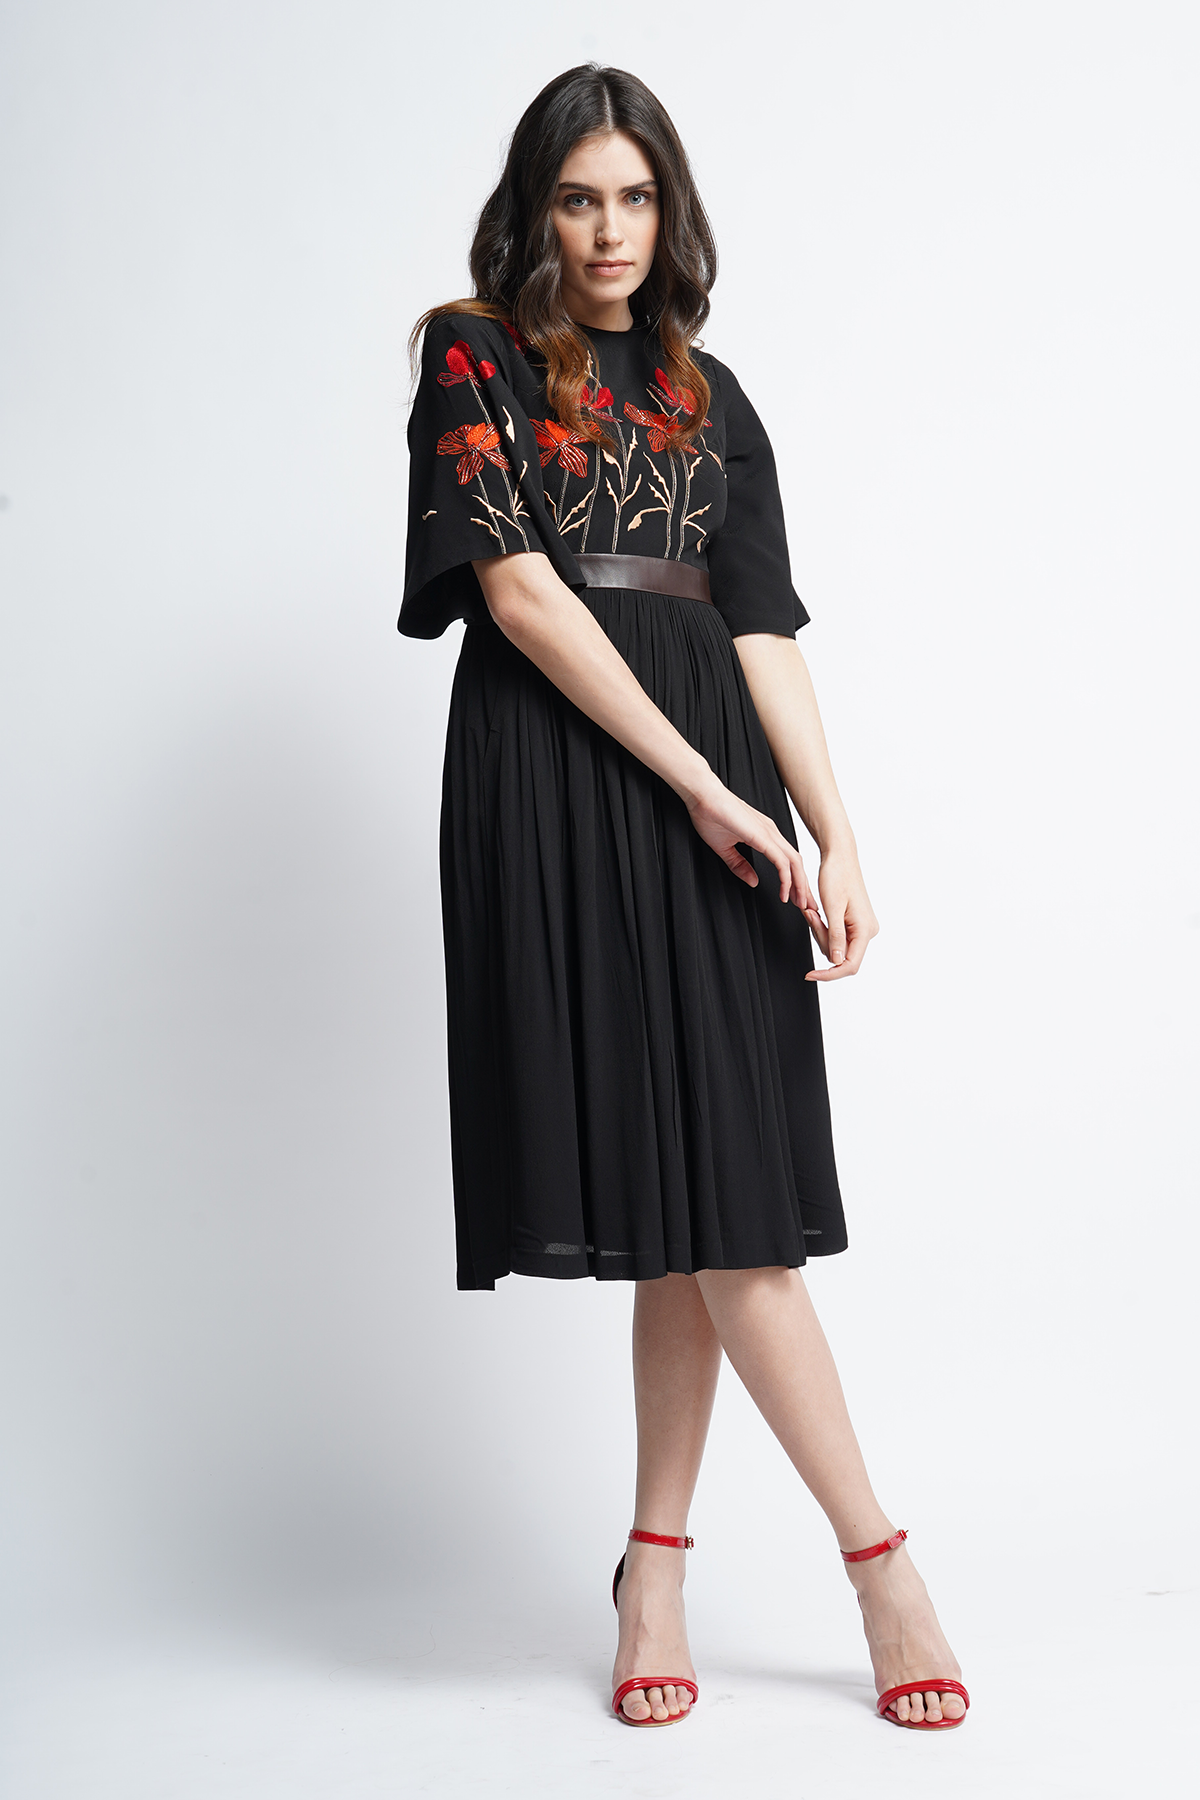 Blooming Flower Midi Dress With Leather Belt